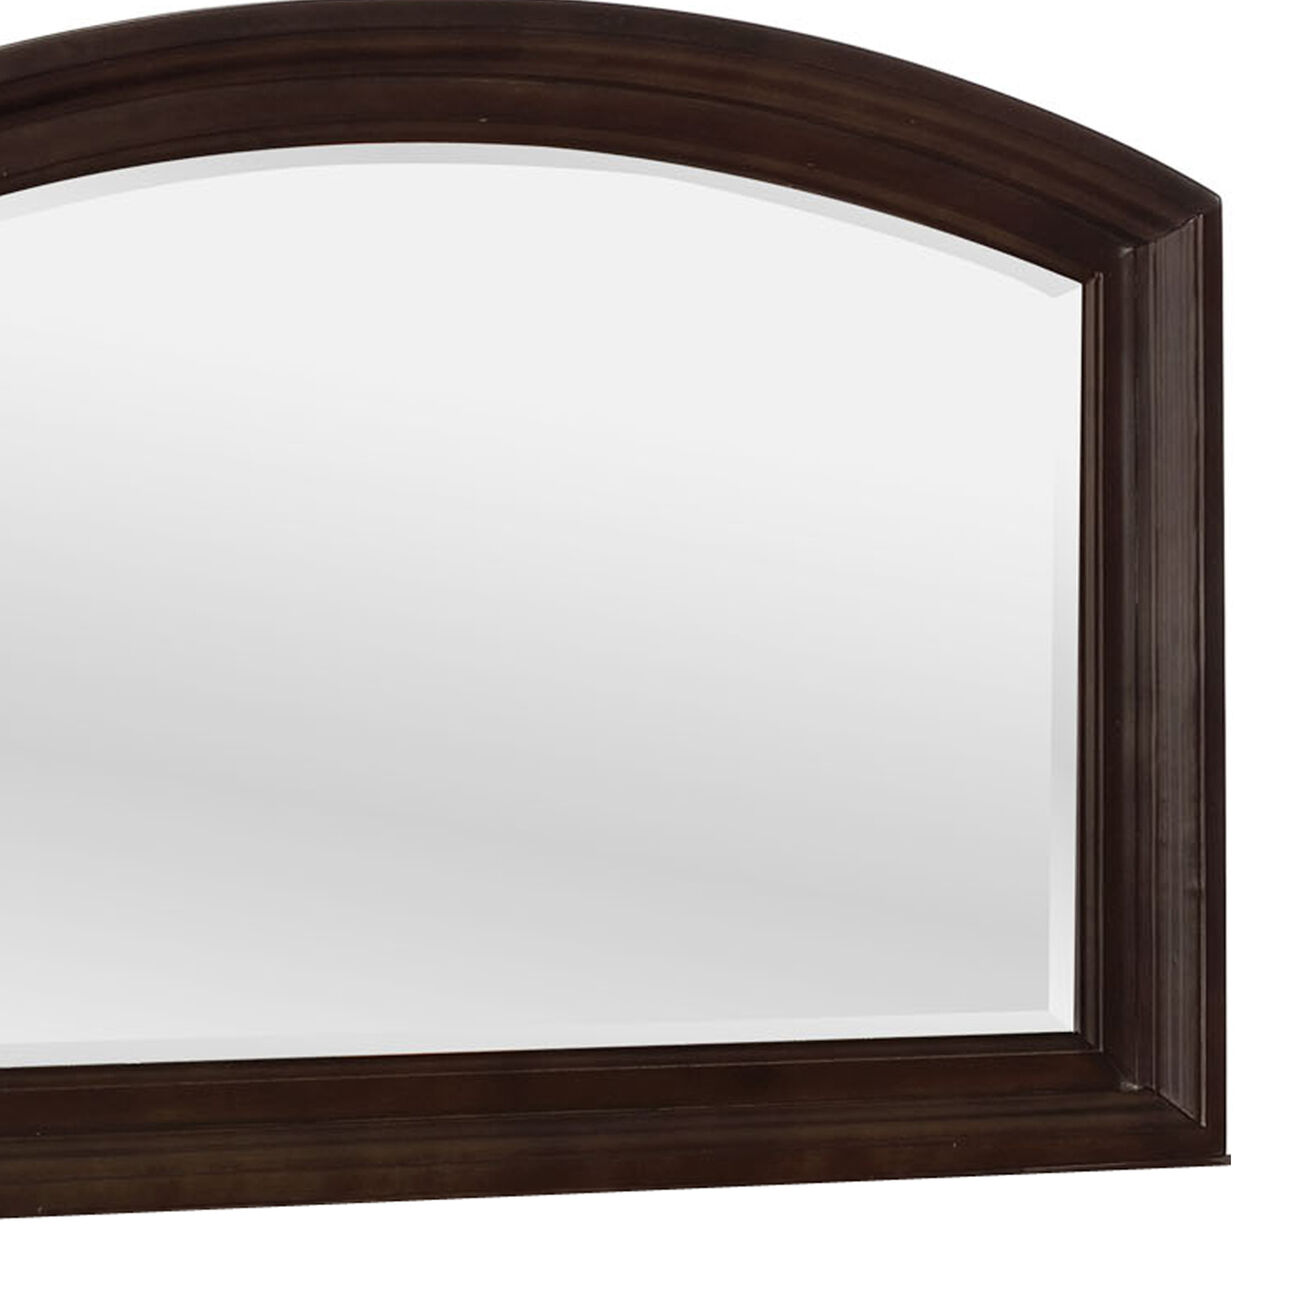 Arch Shape Dresser Top Beveled Mirror with Wooden Frame, Brown and Silver - BM215436